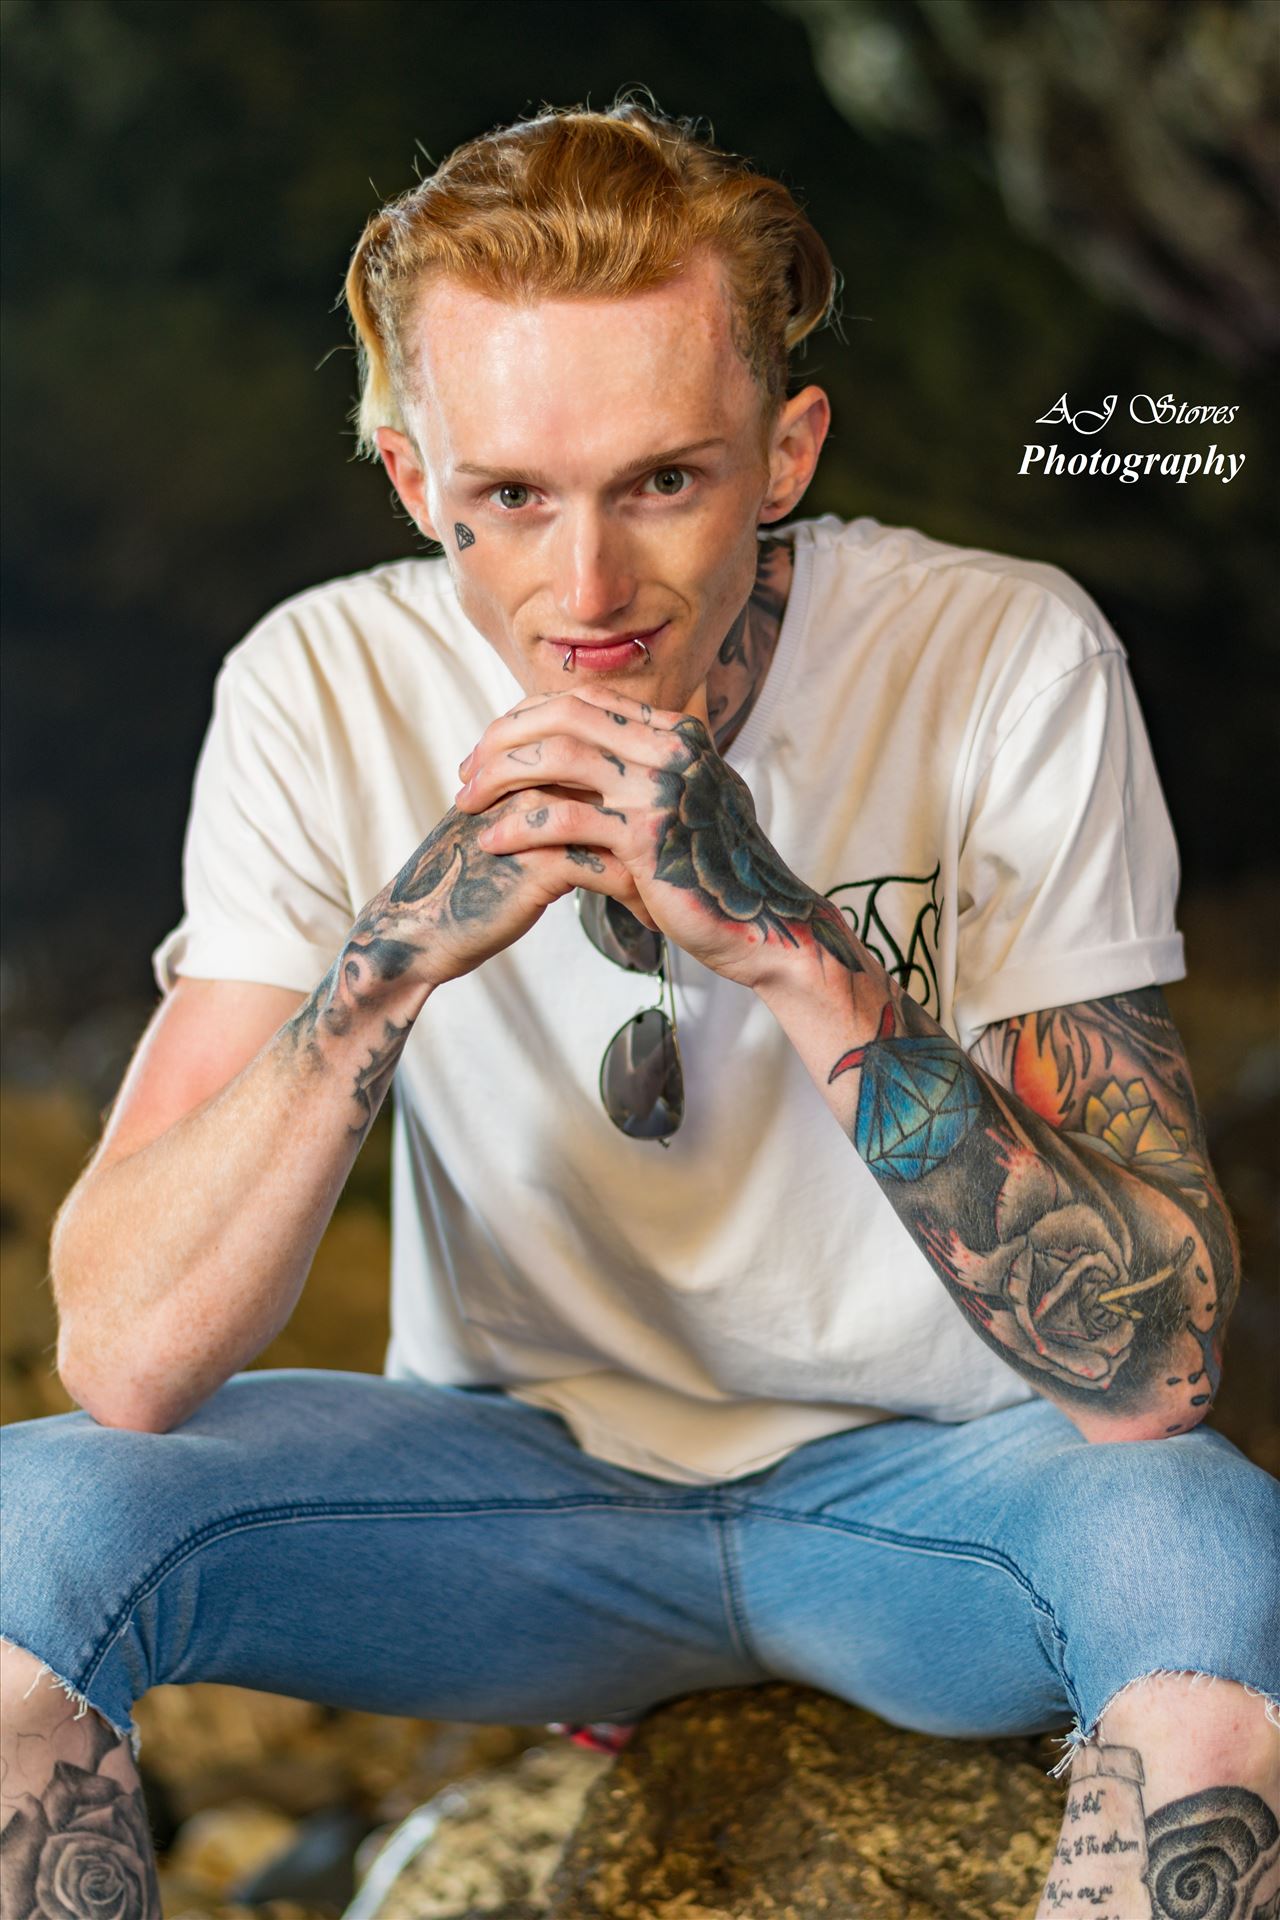 Luke Proctor 07 - Great shoot with Luke down Seaham Beach by AJ Stoves Photography